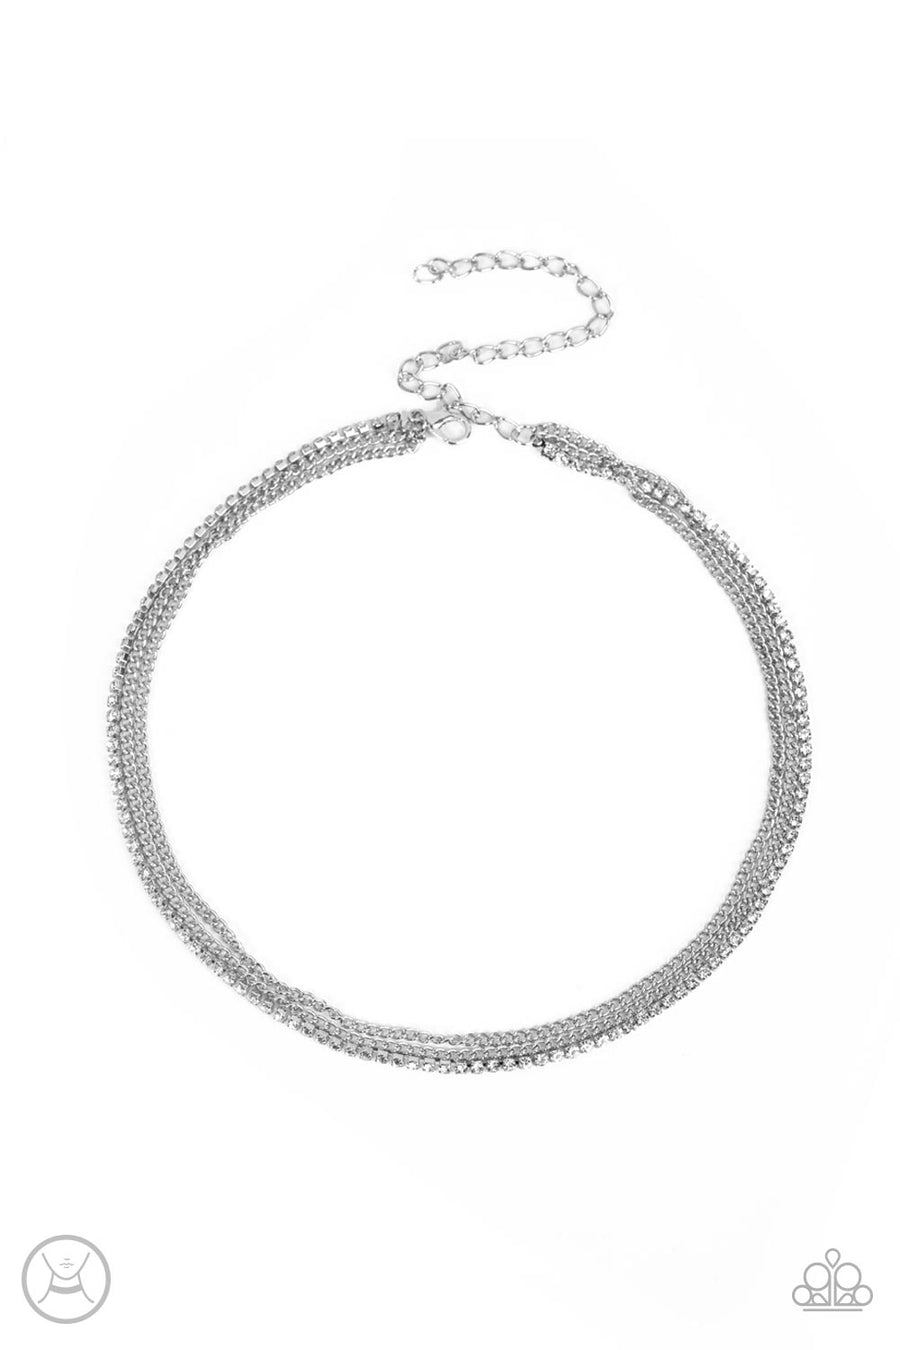 Glitzy Gusto - White and Silver Necklace - Paparazzi Accessories - Two glistening silver chains and a single strand of dainty white rhinestones effortlessly layer around the neck, resulting in a radiant necklace.